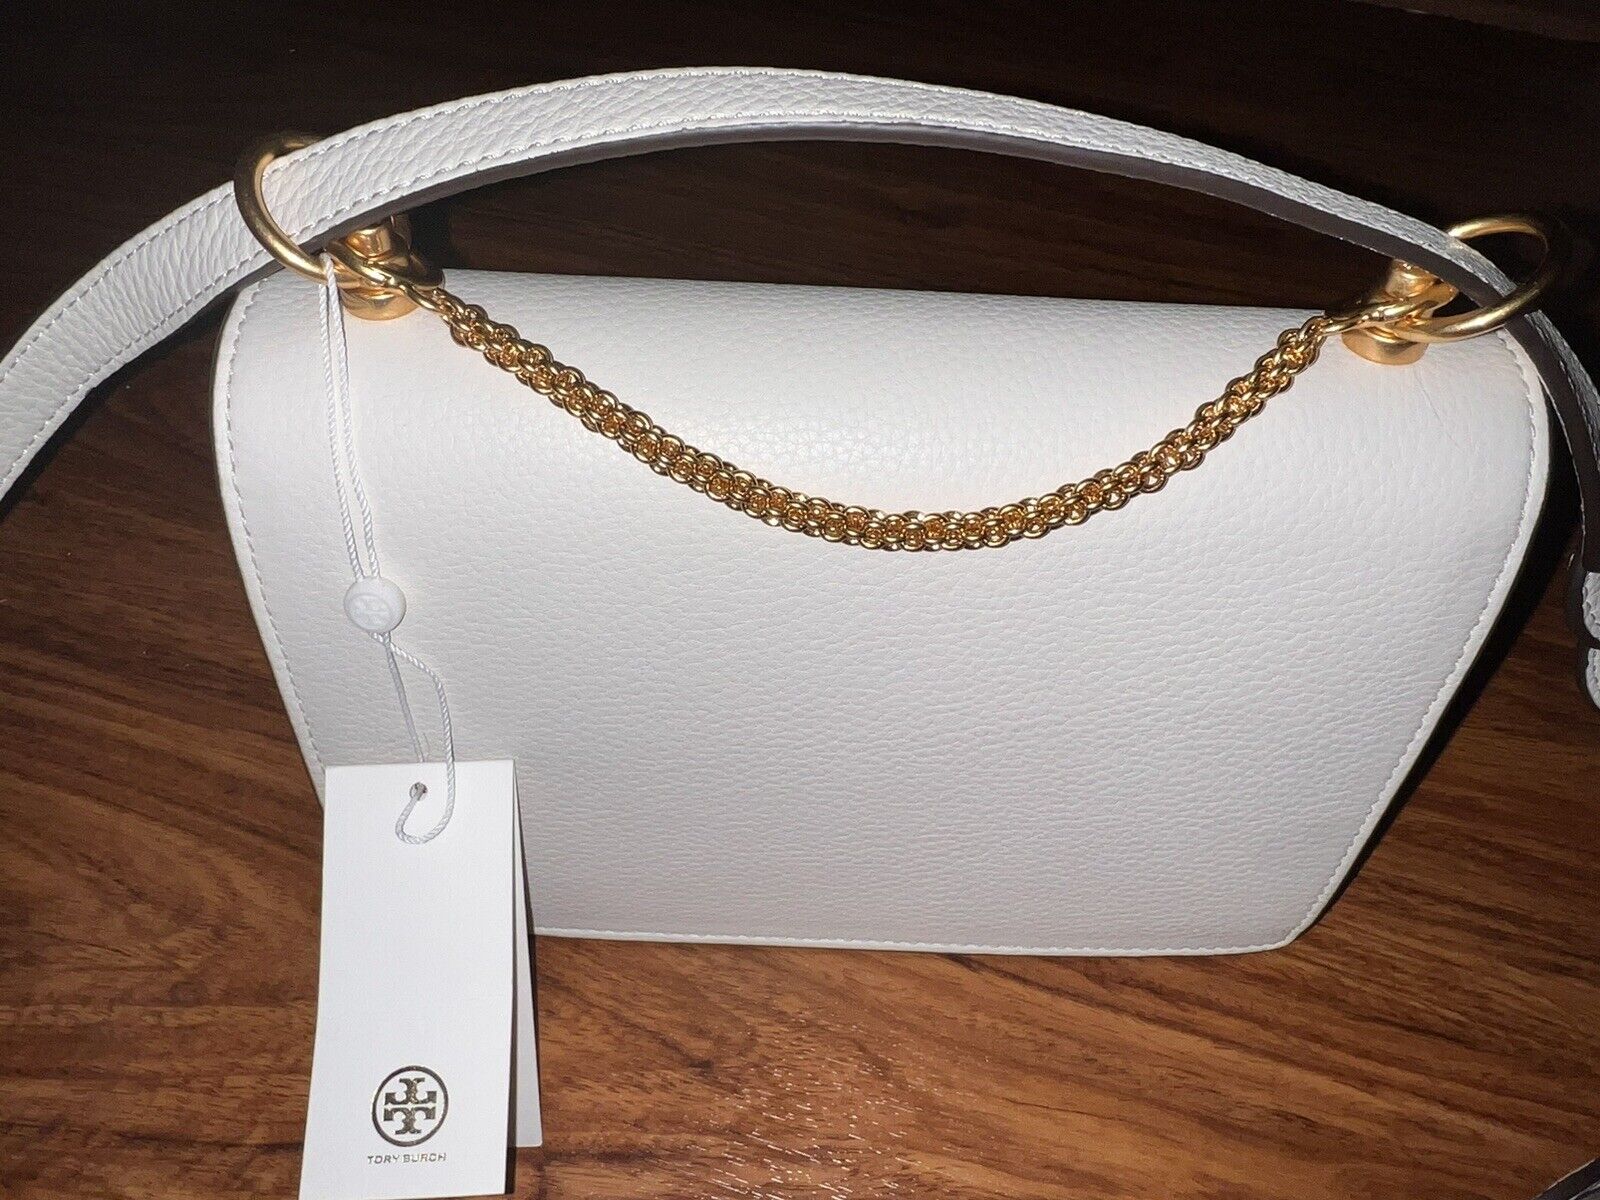 TORY BURCH MINI MILLER LEATHER BAG WITH LOGO Spring/Summer 23